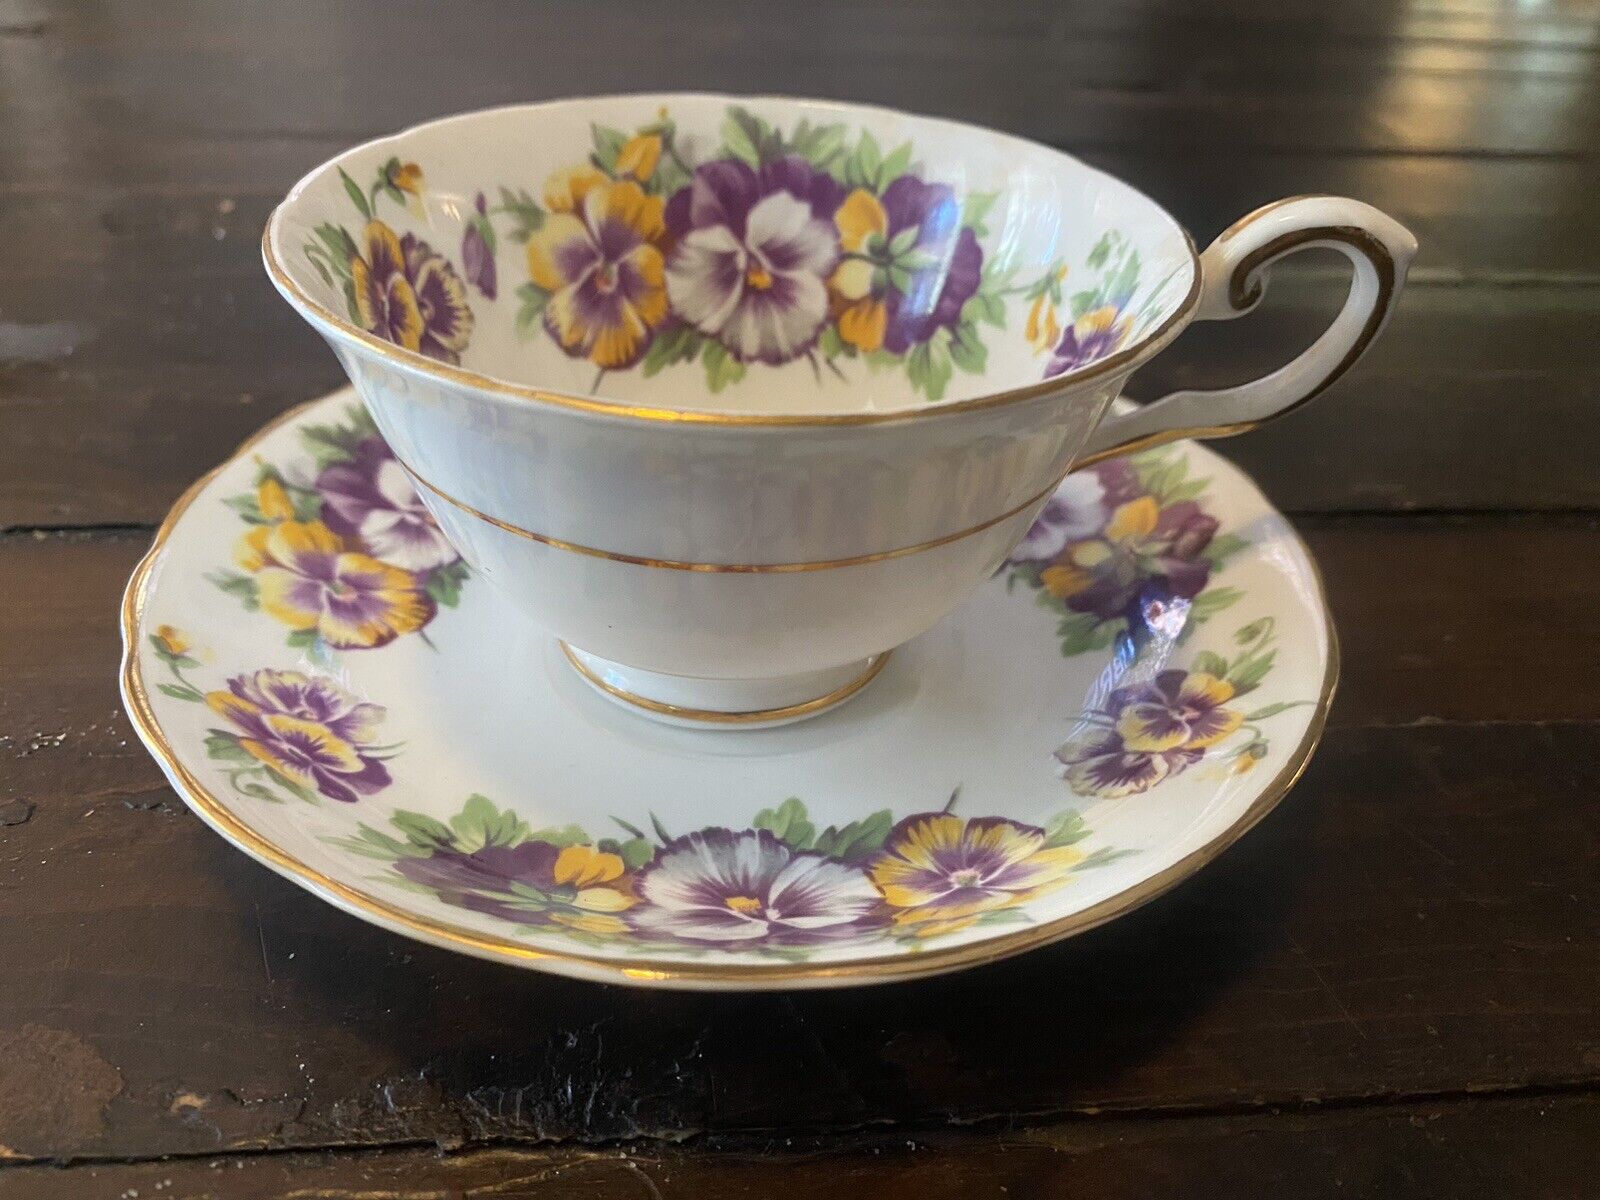 Vintage Tuscan Fine Bone China England Tea Cup And Saucer C9C49 Floral Pattern